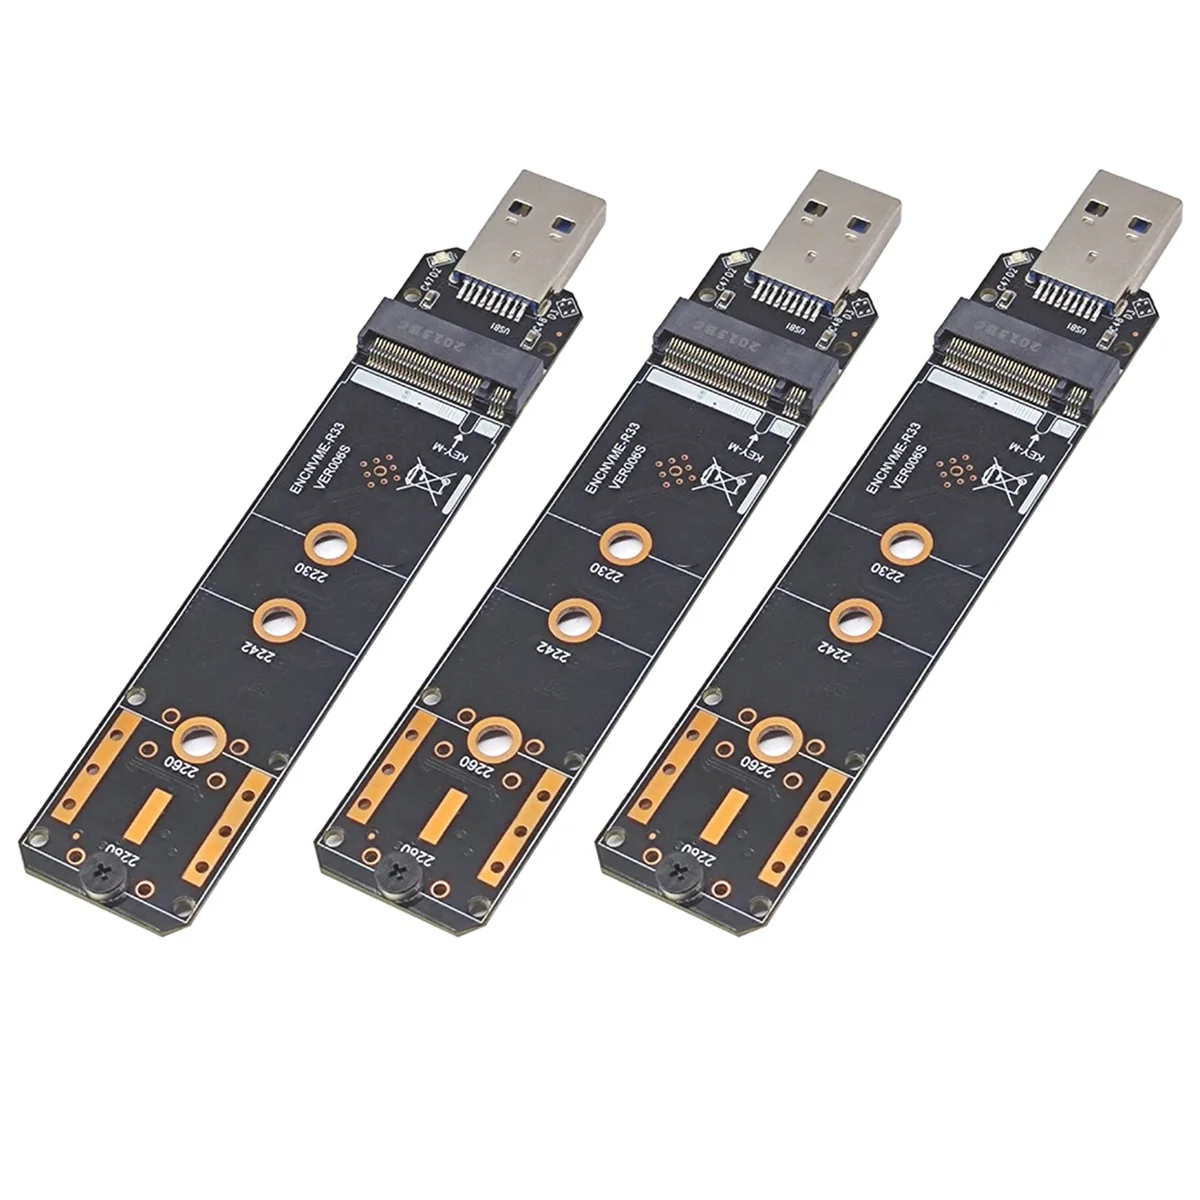 

3X M.2 NVME SSD to USB3.2 GEN2 10Gbps Adapter M.2 NVME SSD Adapter for 2230 2242 2260 2280 NVME M.2 SSD RTL9210B